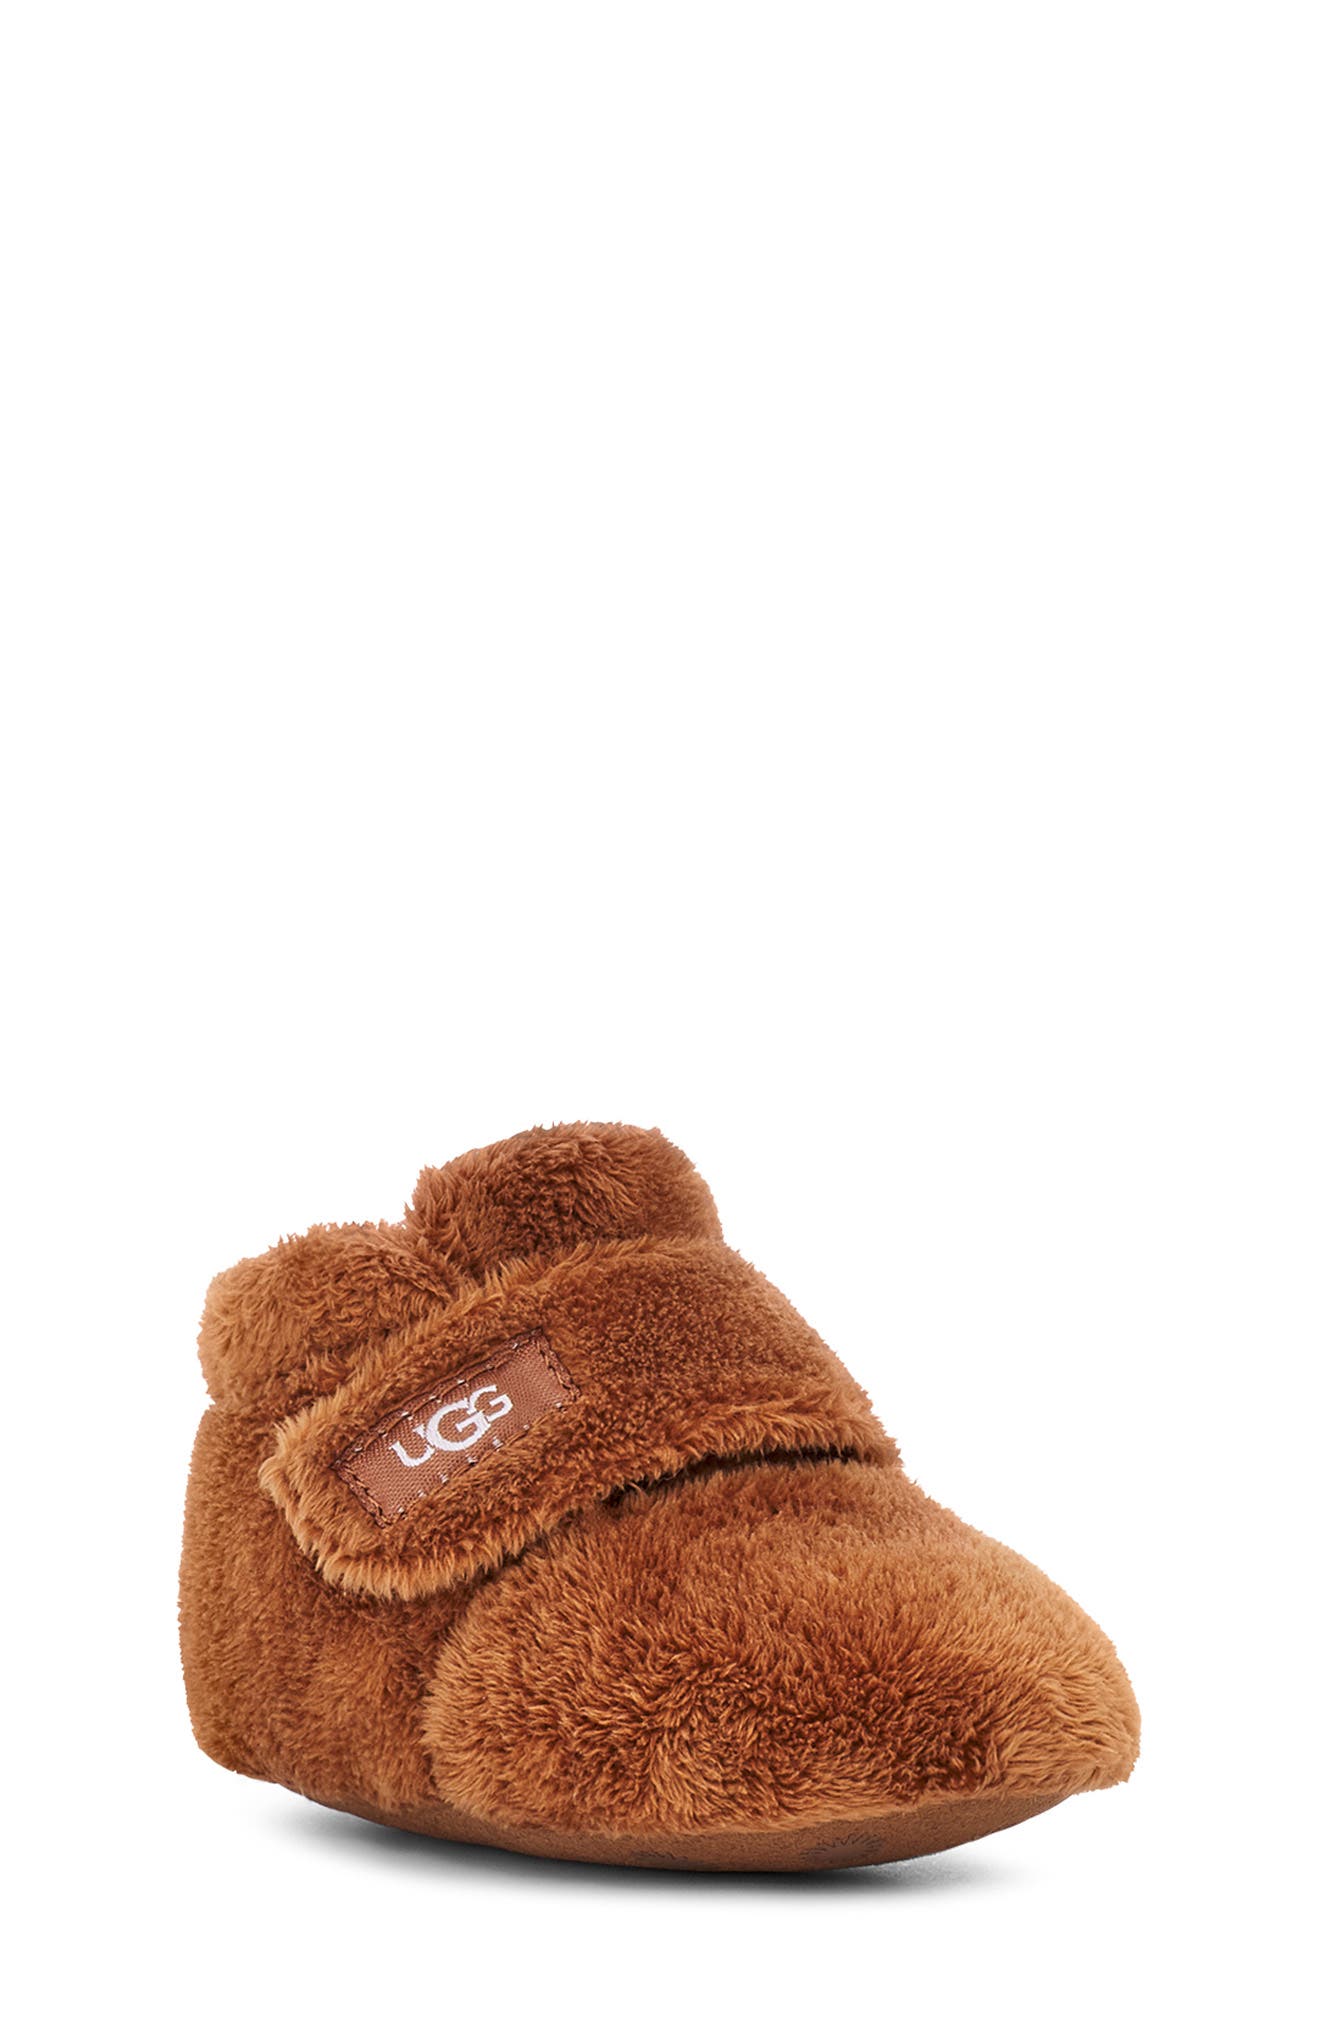 baby uggs slippers